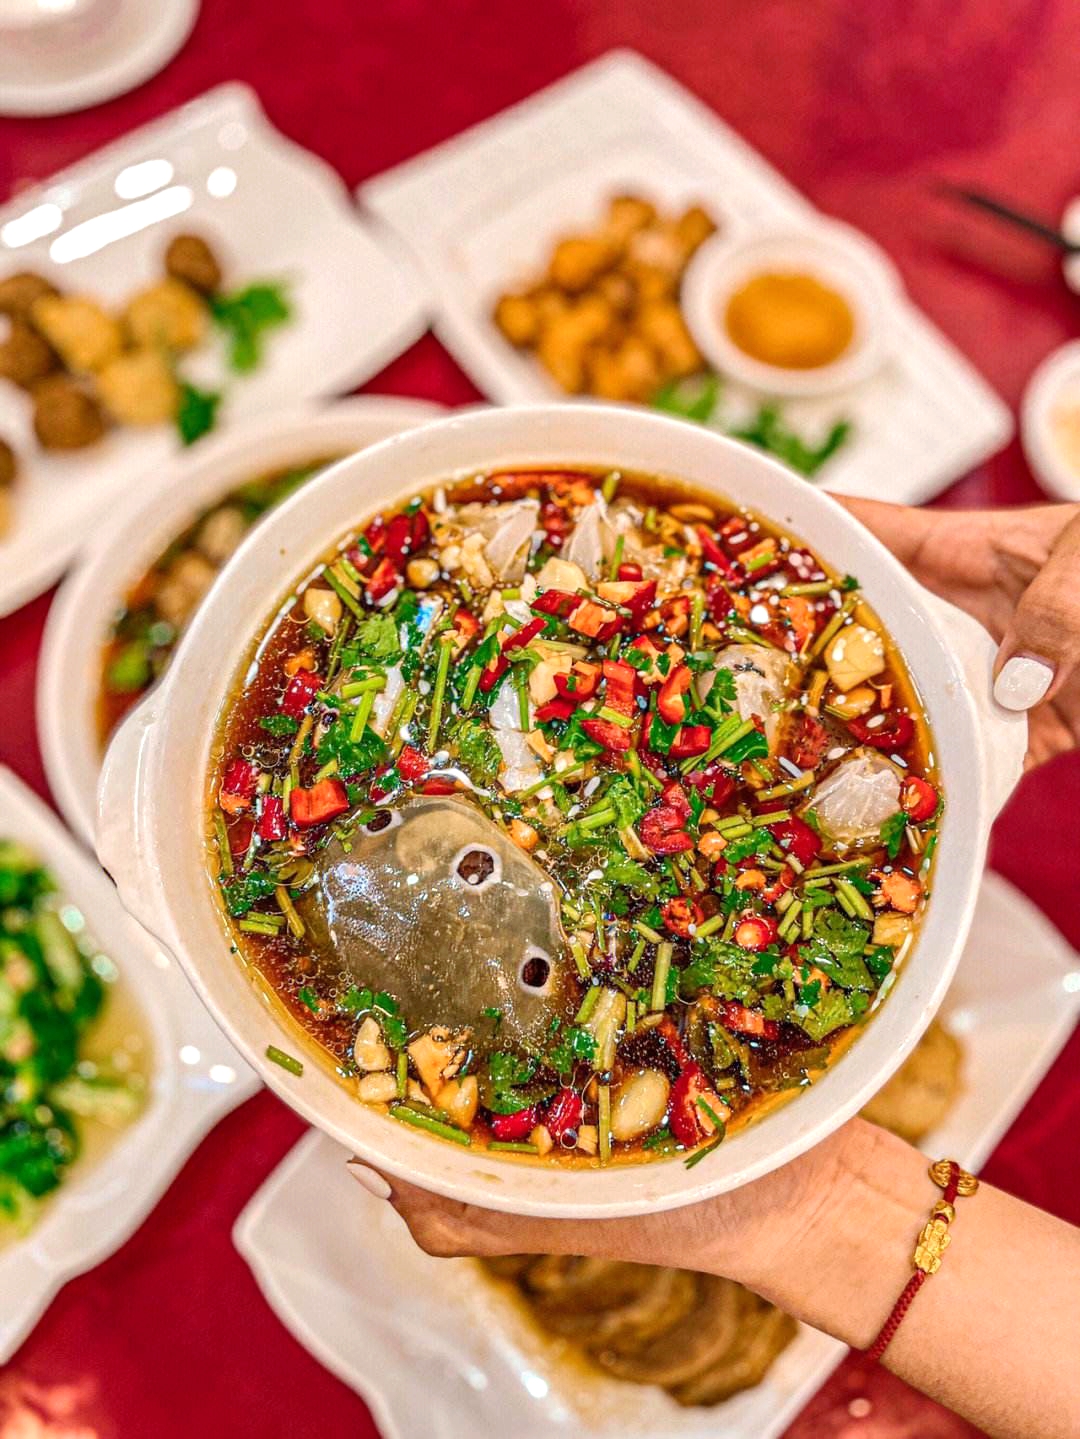 Raw pickled seafood made from fresh seafood marinated in citrus juices such as lemon or lime and spiced with chili peppers is popular in southern China. /Photo provided to CGTN